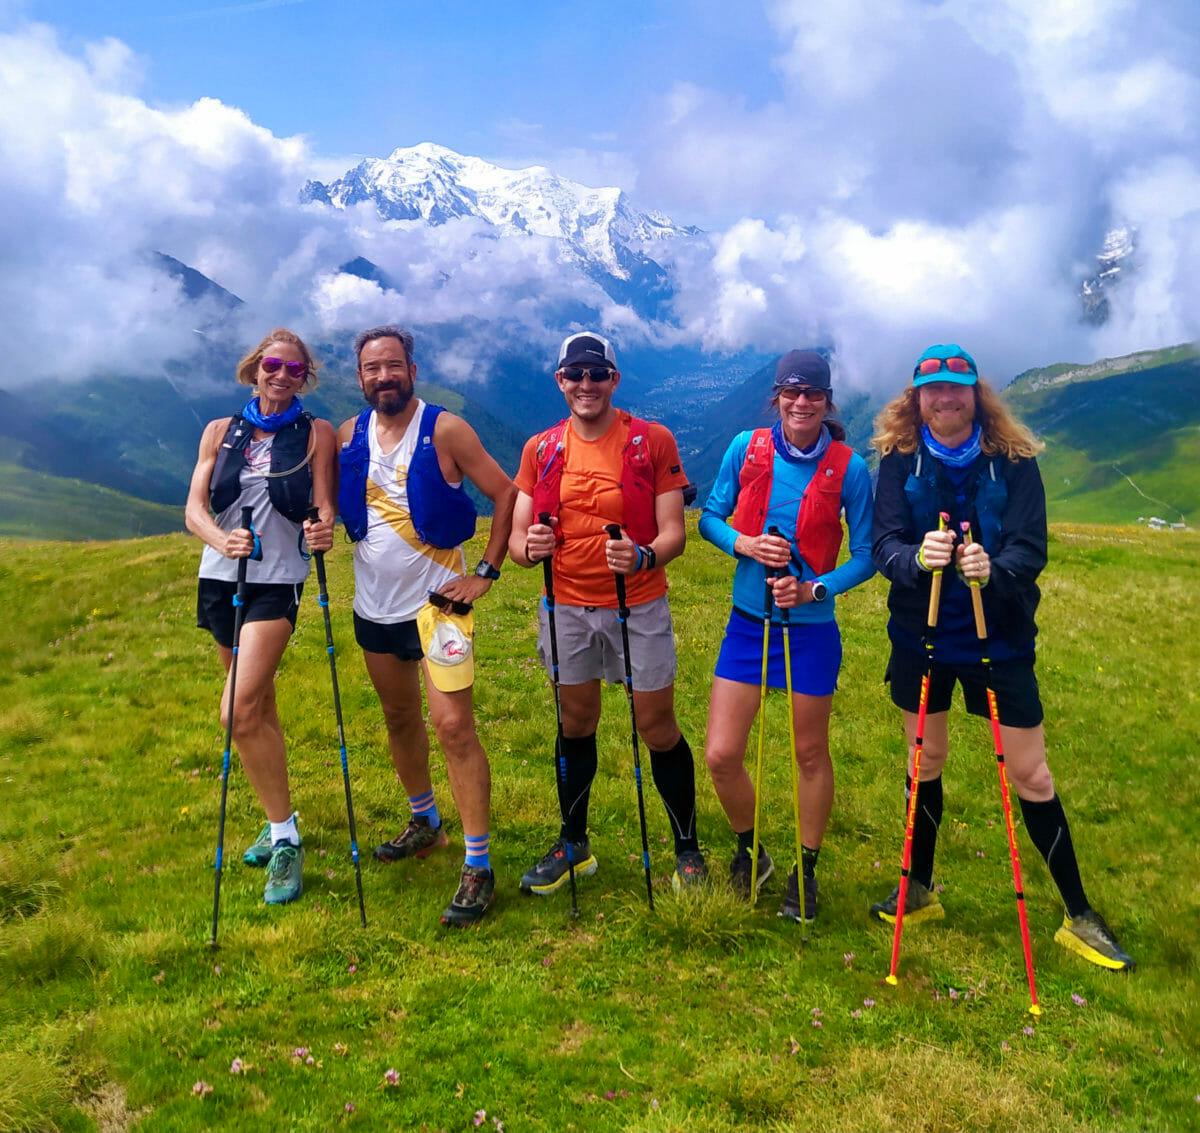 Five trail runners stop and posed with the Mont Blanc Massif at the back